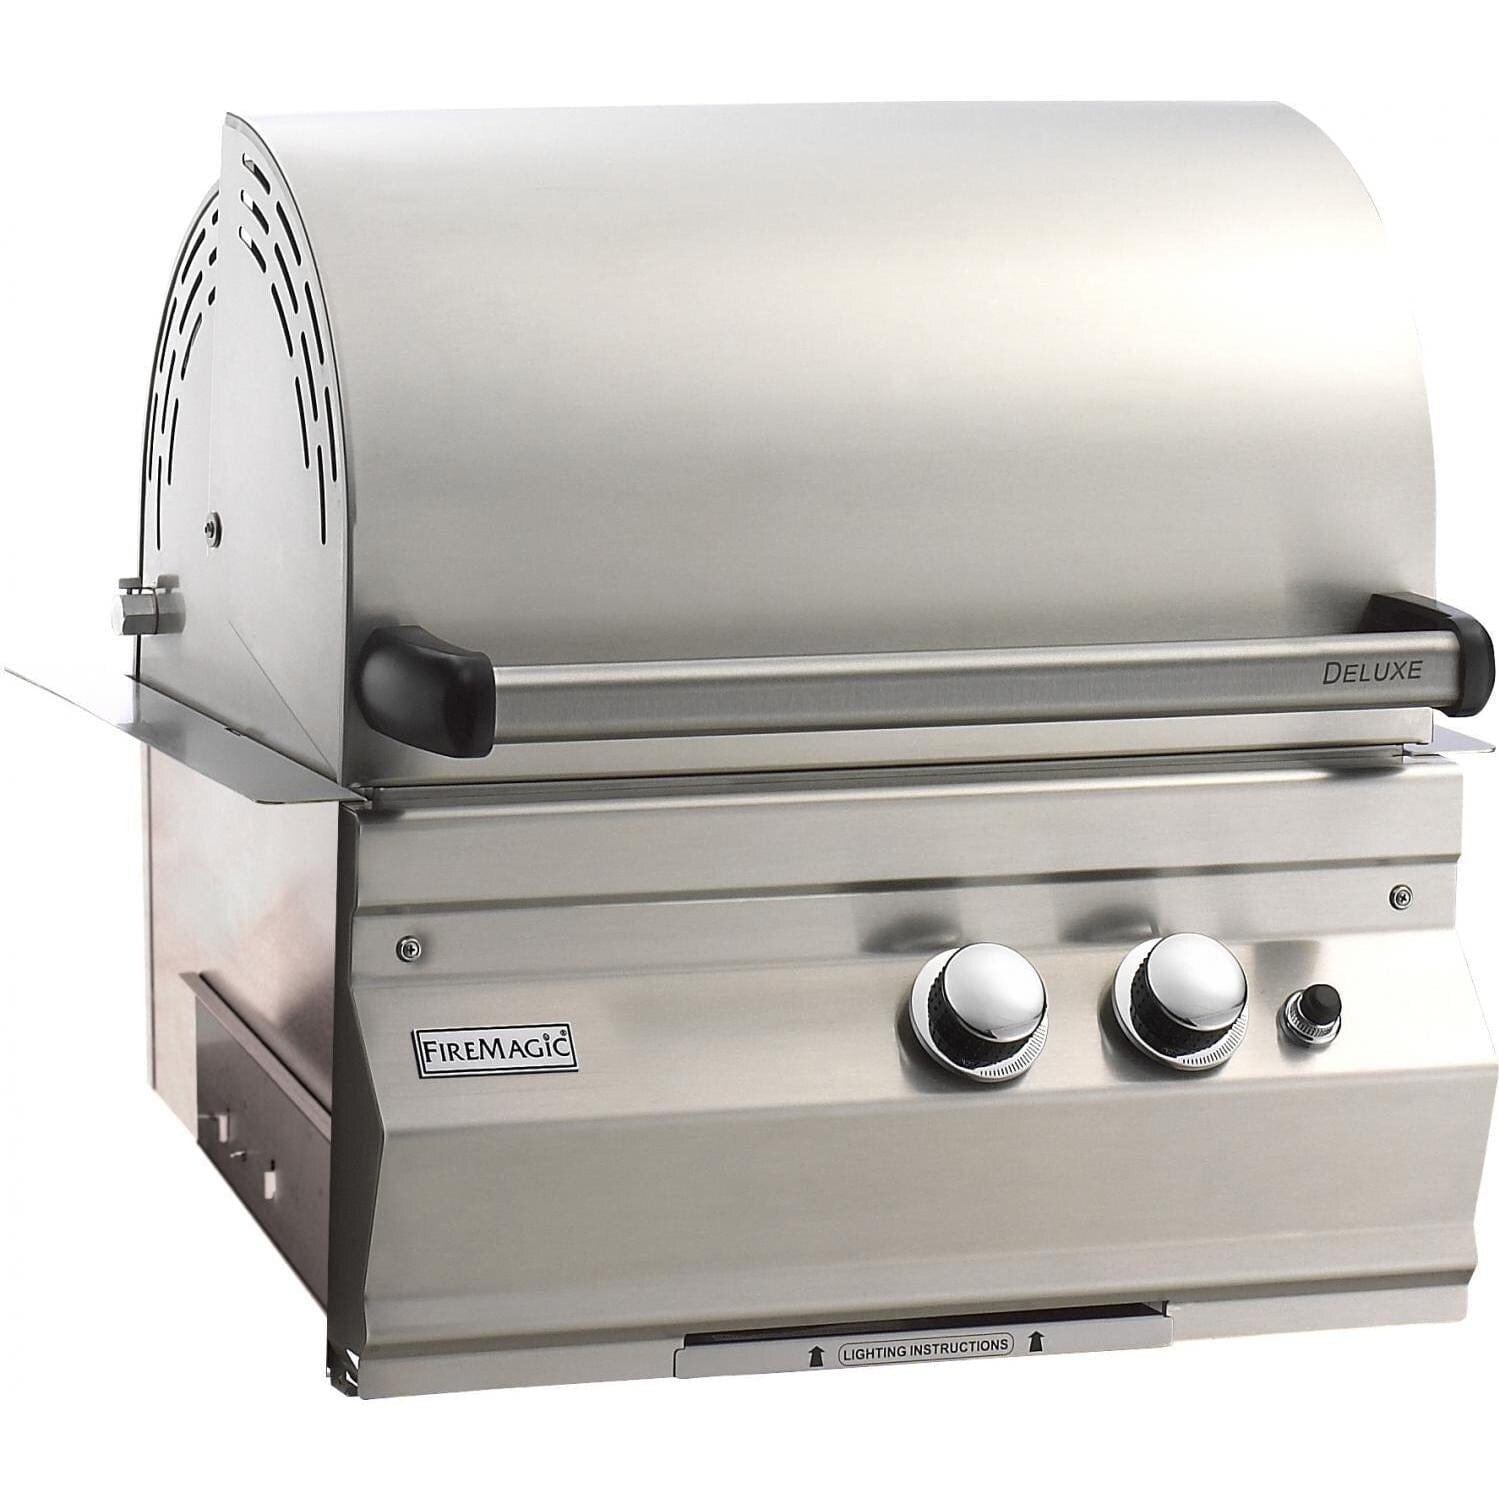 Firemagic Grills Fire Magic Legacy Deluxe Gas Built-In Grill - 11S1S1N-A